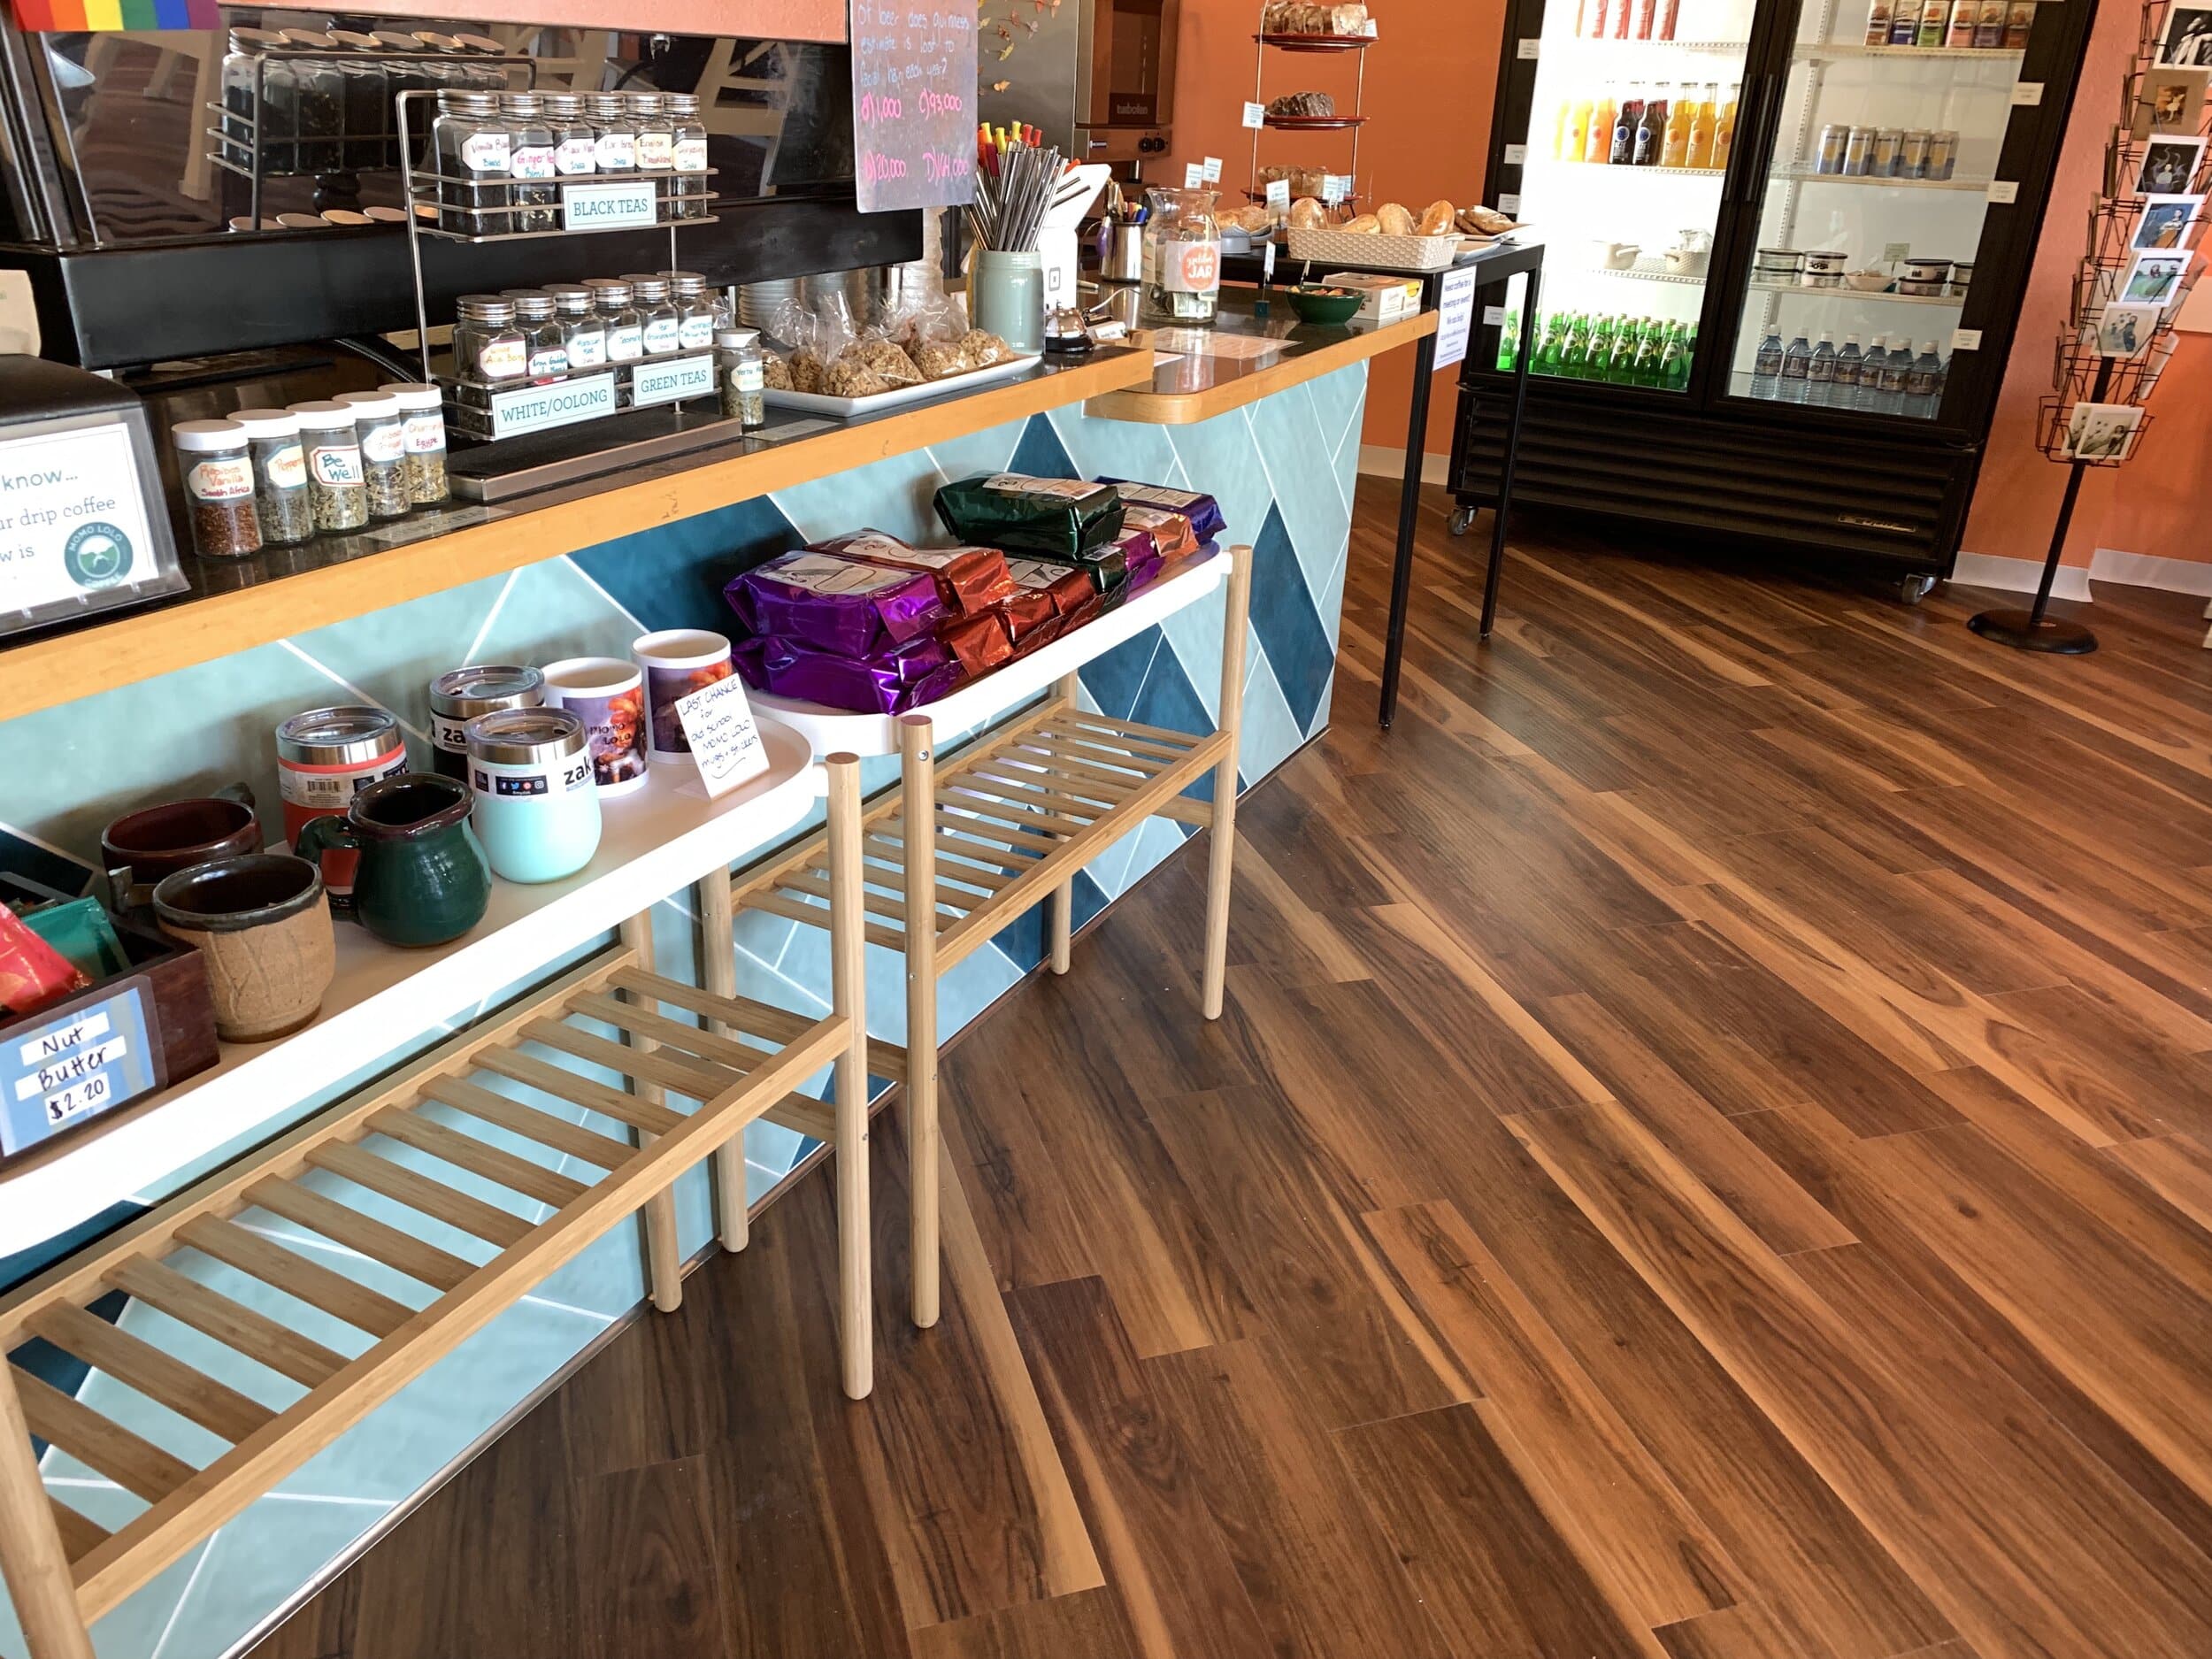 Blue tile coffee bar with hard wood floors and an orange accent wall